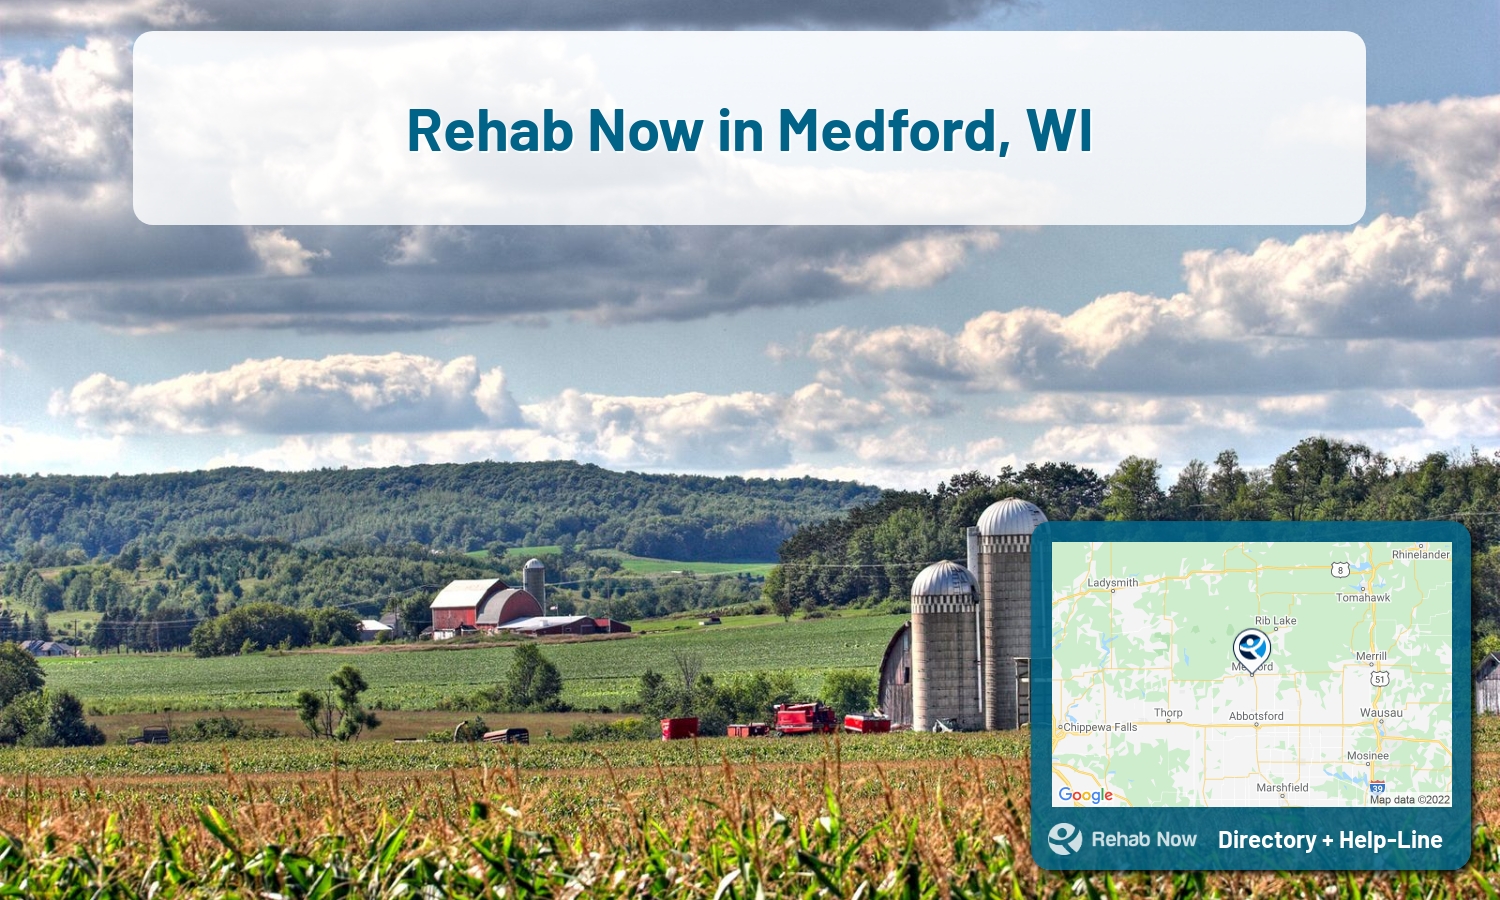 Drug rehab and alcohol treatment services nearby Medford, WI. Need help choosing a treatment program? Call our free hotline!